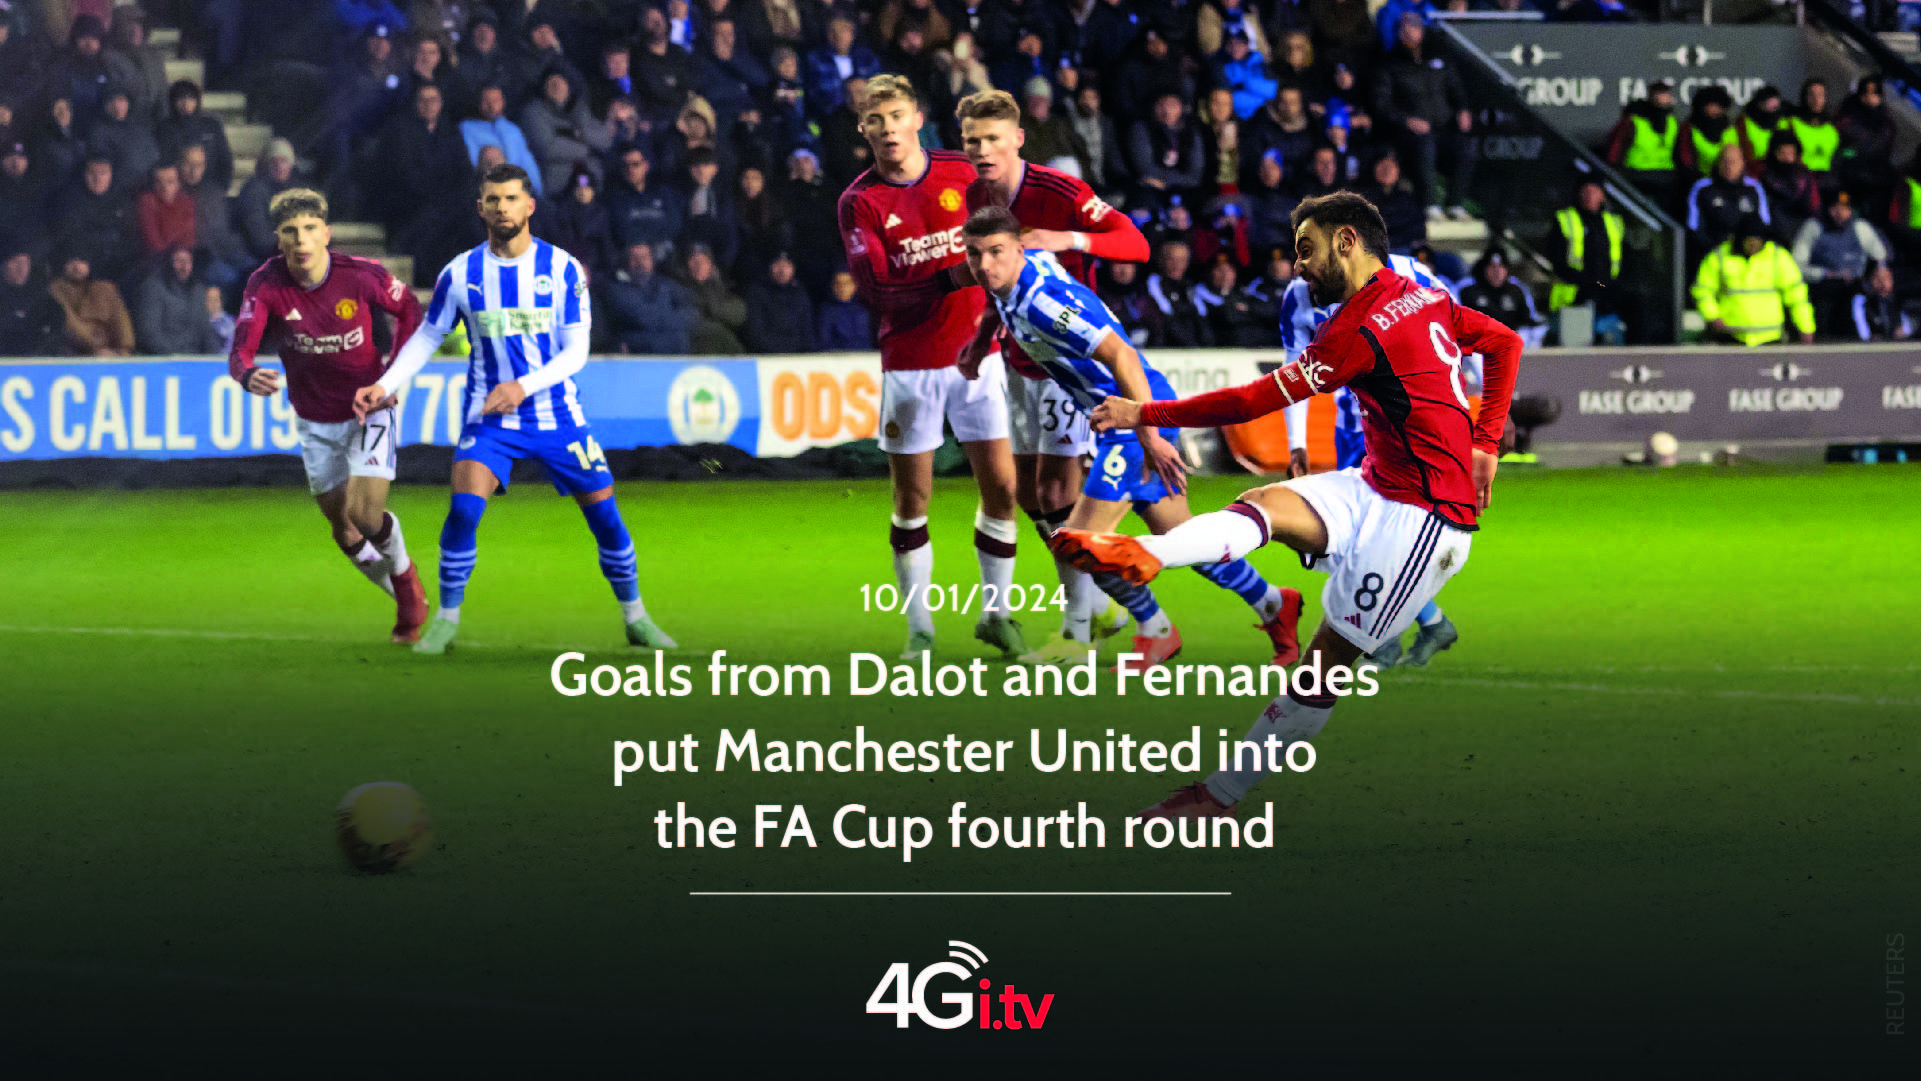 Lee más sobre el artículo Goals from Dalot and Fernandes put Manchester United into the FA Cup fourth round